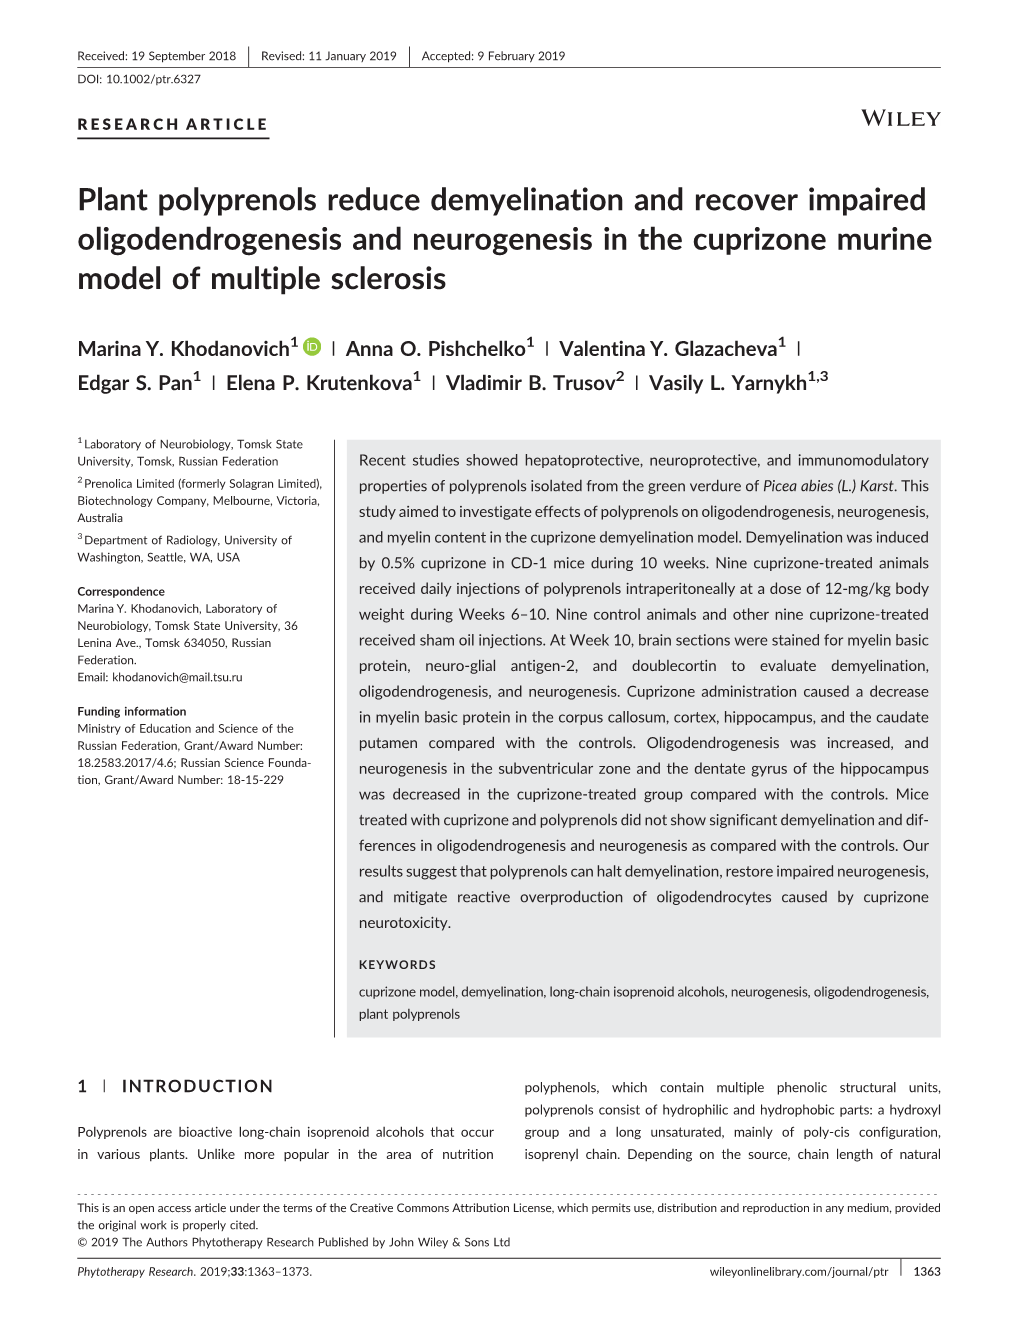 Plant Polyprenols Reduce Demyelination and Recover Impaired Oligodendrogenesis and Neurogenesis in the Cuprizone Murine Model of Multiple Sclerosis